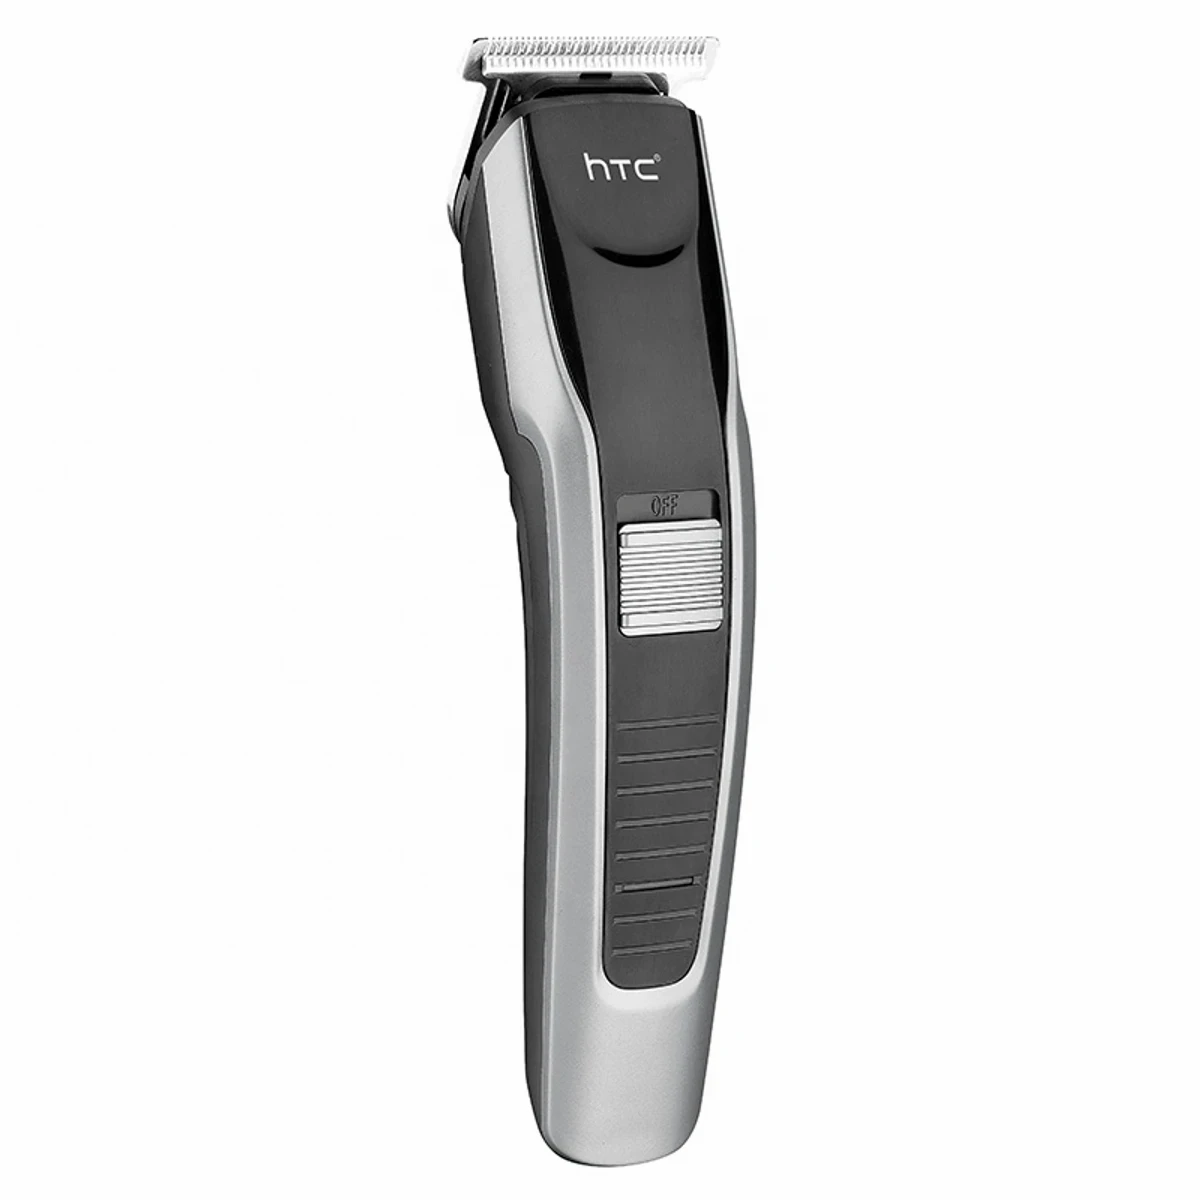 HTC AT-538 RECHARGEABLE HAIR TRIMMER